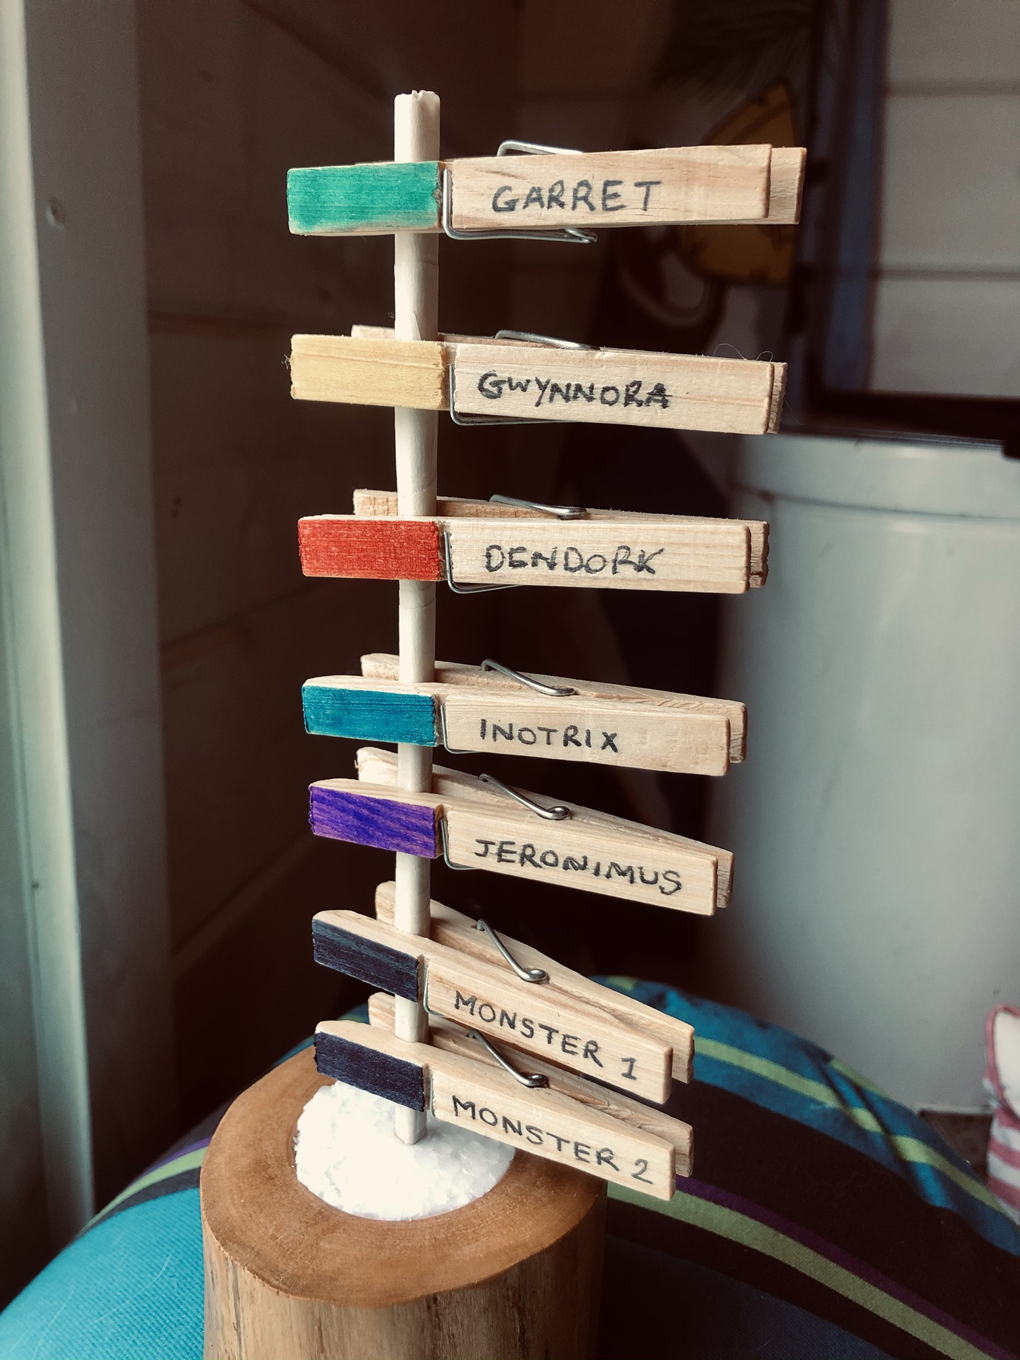 An initiative tracker made from a vertical dowel inserted into a base, with named and coloured clothes pegs for each character